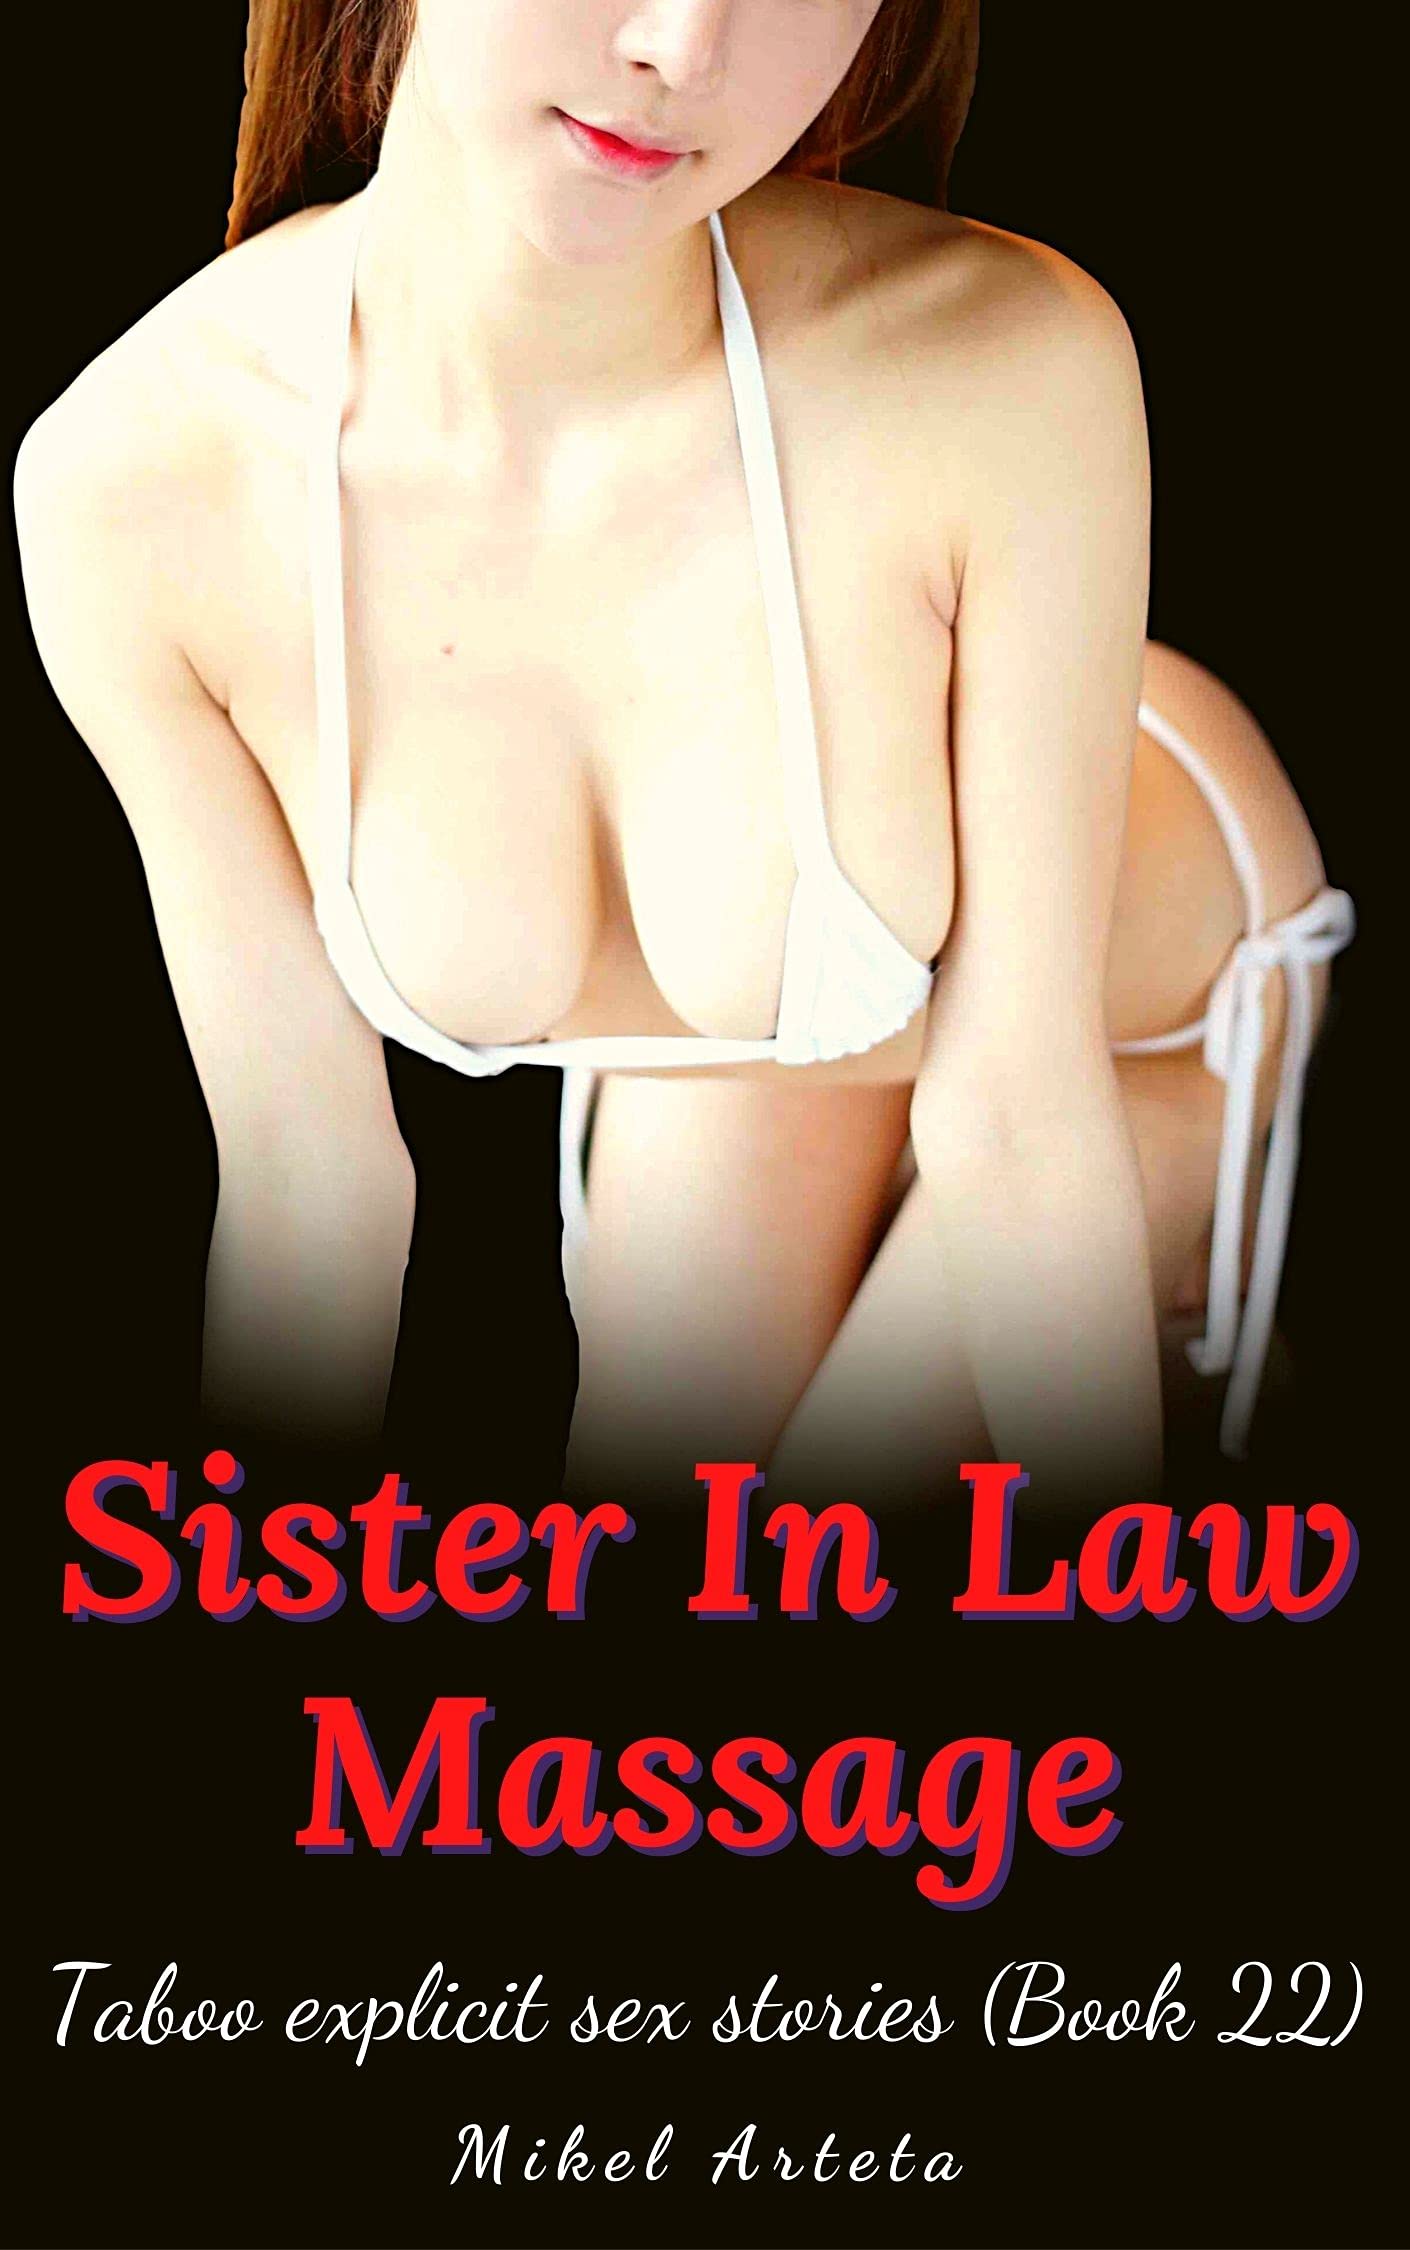 caroline house recommends Sister In Law Massage